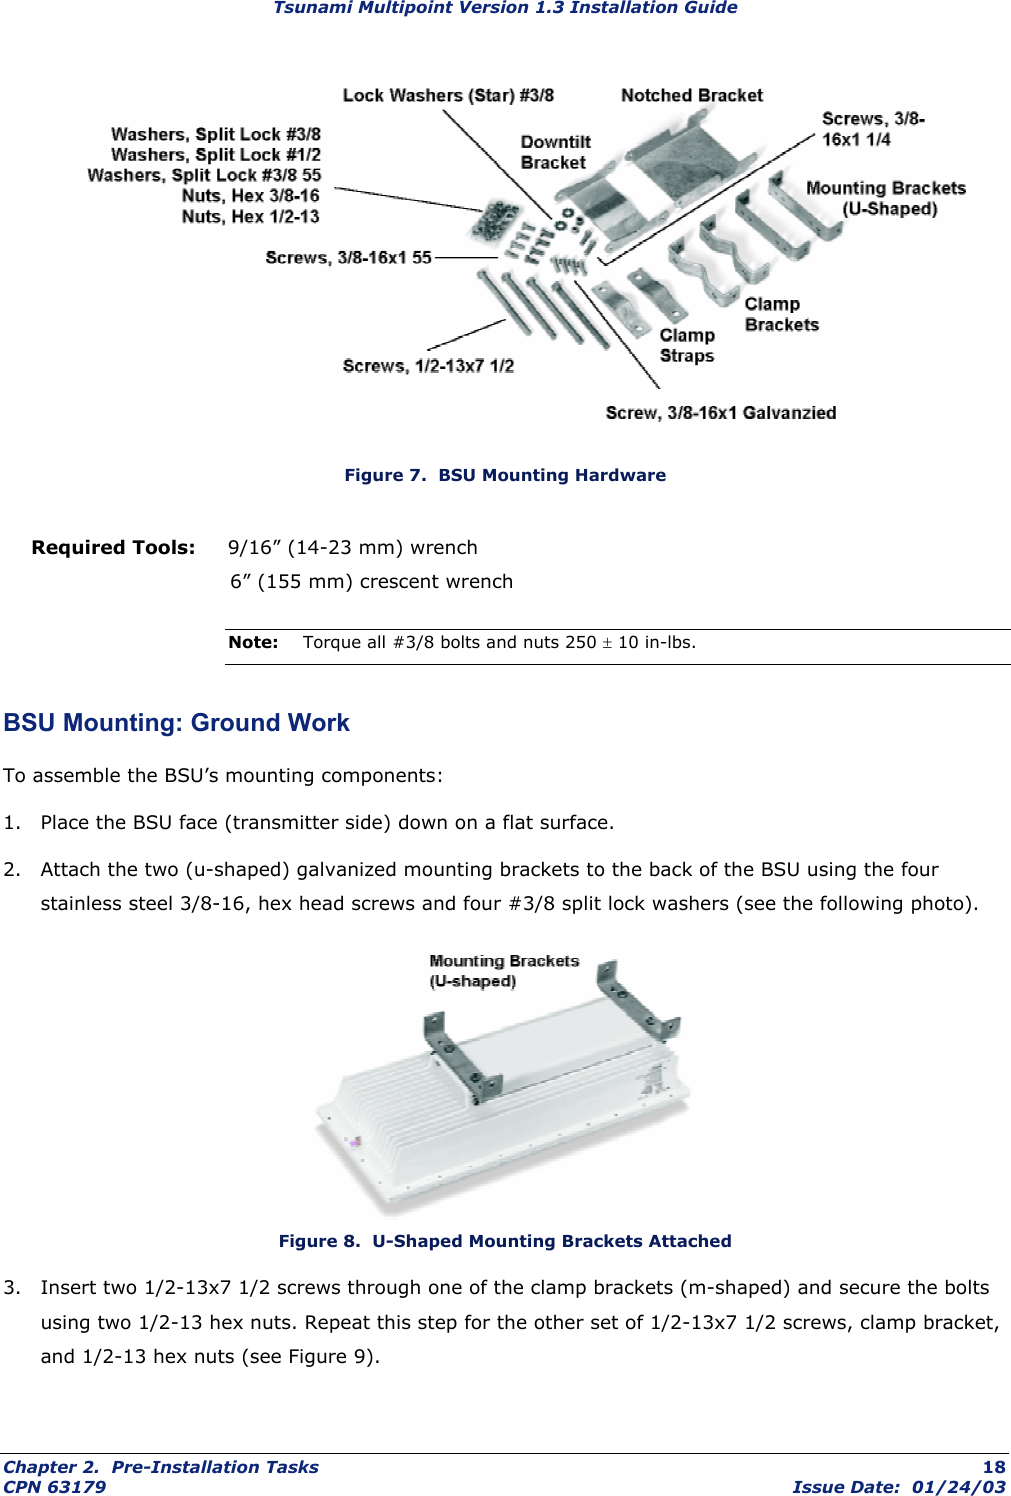 Tsunami Multipoint Version 1.3 Installation Guide  Figure 7.  BSU Mounting Hardware Required Tools:     9/16” (14-23 mm) wrench                               6” (155 mm) crescent wrench Note:  Torque all #3/8 bolts and nuts 250 ± 10 in-lbs. BSU Mounting: Ground Work To assemble the BSU’s mounting components: 1.  Place the BSU face (transmitter side) down on a flat surface. 2.  Attach the two (u-shaped) galvanized mounting brackets to the back of the BSU using the four stainless steel 3/8-16, hex head screws and four #3/8 split lock washers (see the following photo).  Figure 8.  U-Shaped Mounting Brackets Attached 3.  Insert two 1/2-13x7 1/2 screws through one of the clamp brackets (m-shaped) and secure the bolts using two 1/2-13 hex nuts. Repeat this step for the other set of 1/2-13x7 1/2 screws, clamp bracket, and 1/2-13 hex nuts (see Figure 9). Chapter 2.  Pre-Installation Tasks  18 CPN 63179  Issue Date:  01/24/03 